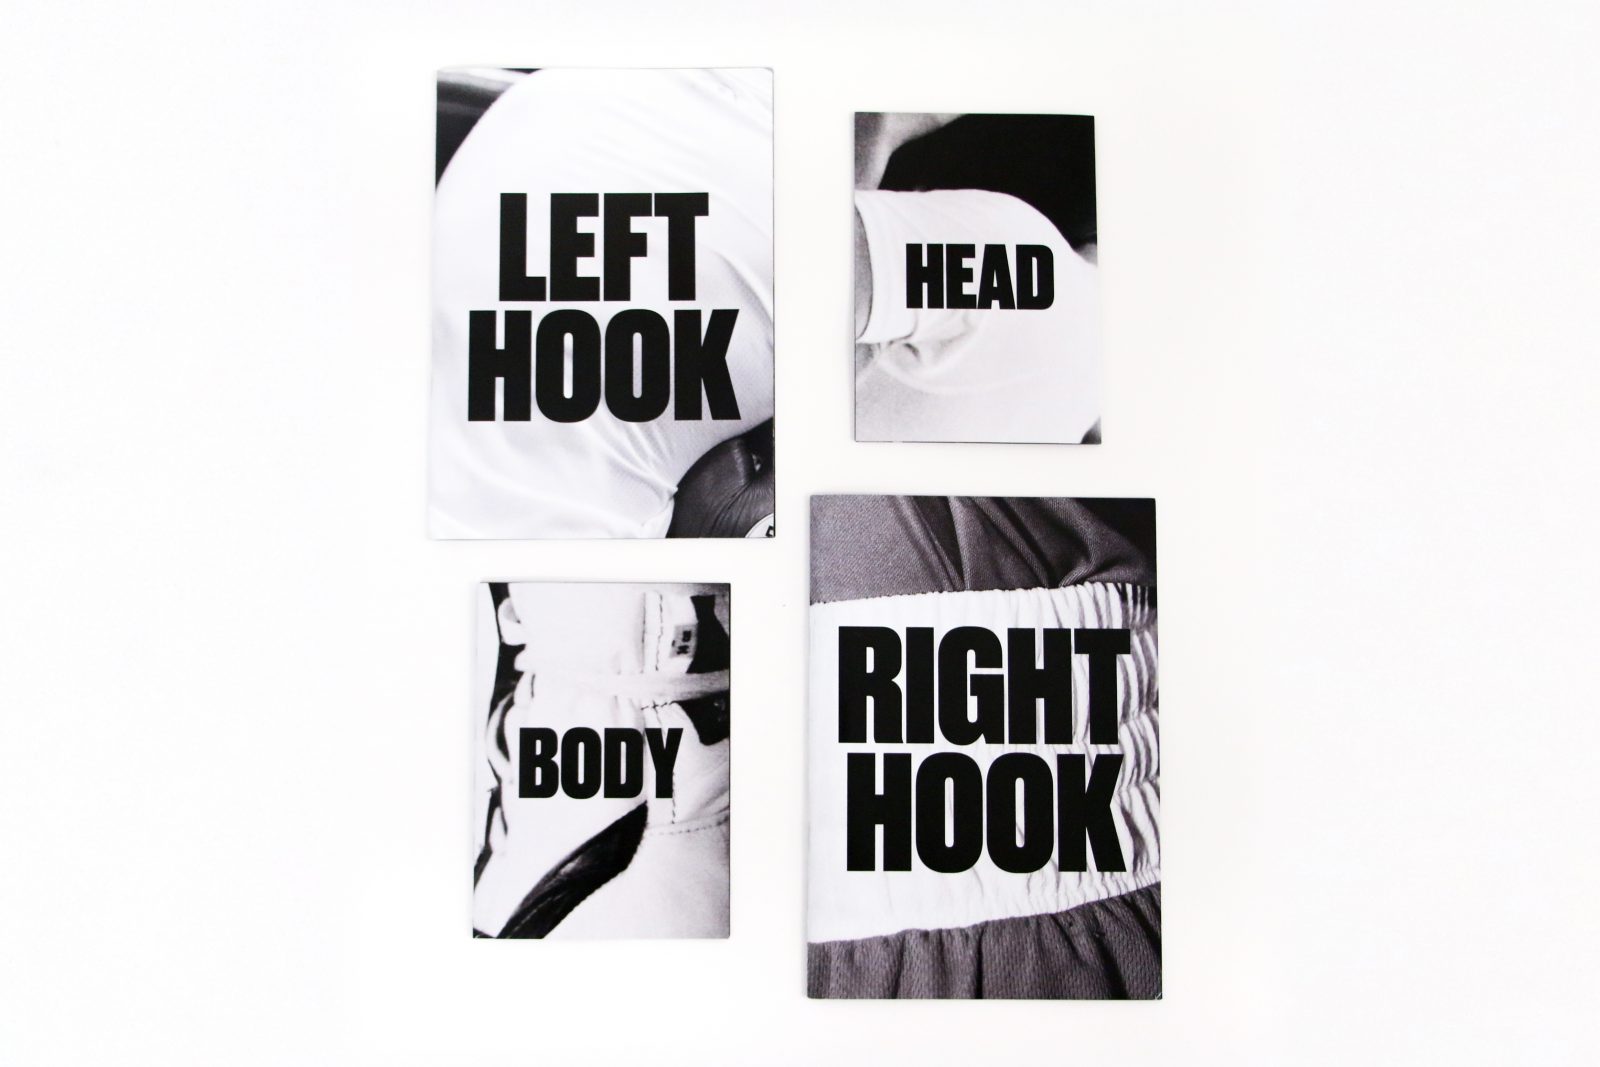 A collage of images with black text. They read 'LEFT HOOK', 'HEAD', 'BODY', 'RIGHT HOOK'.